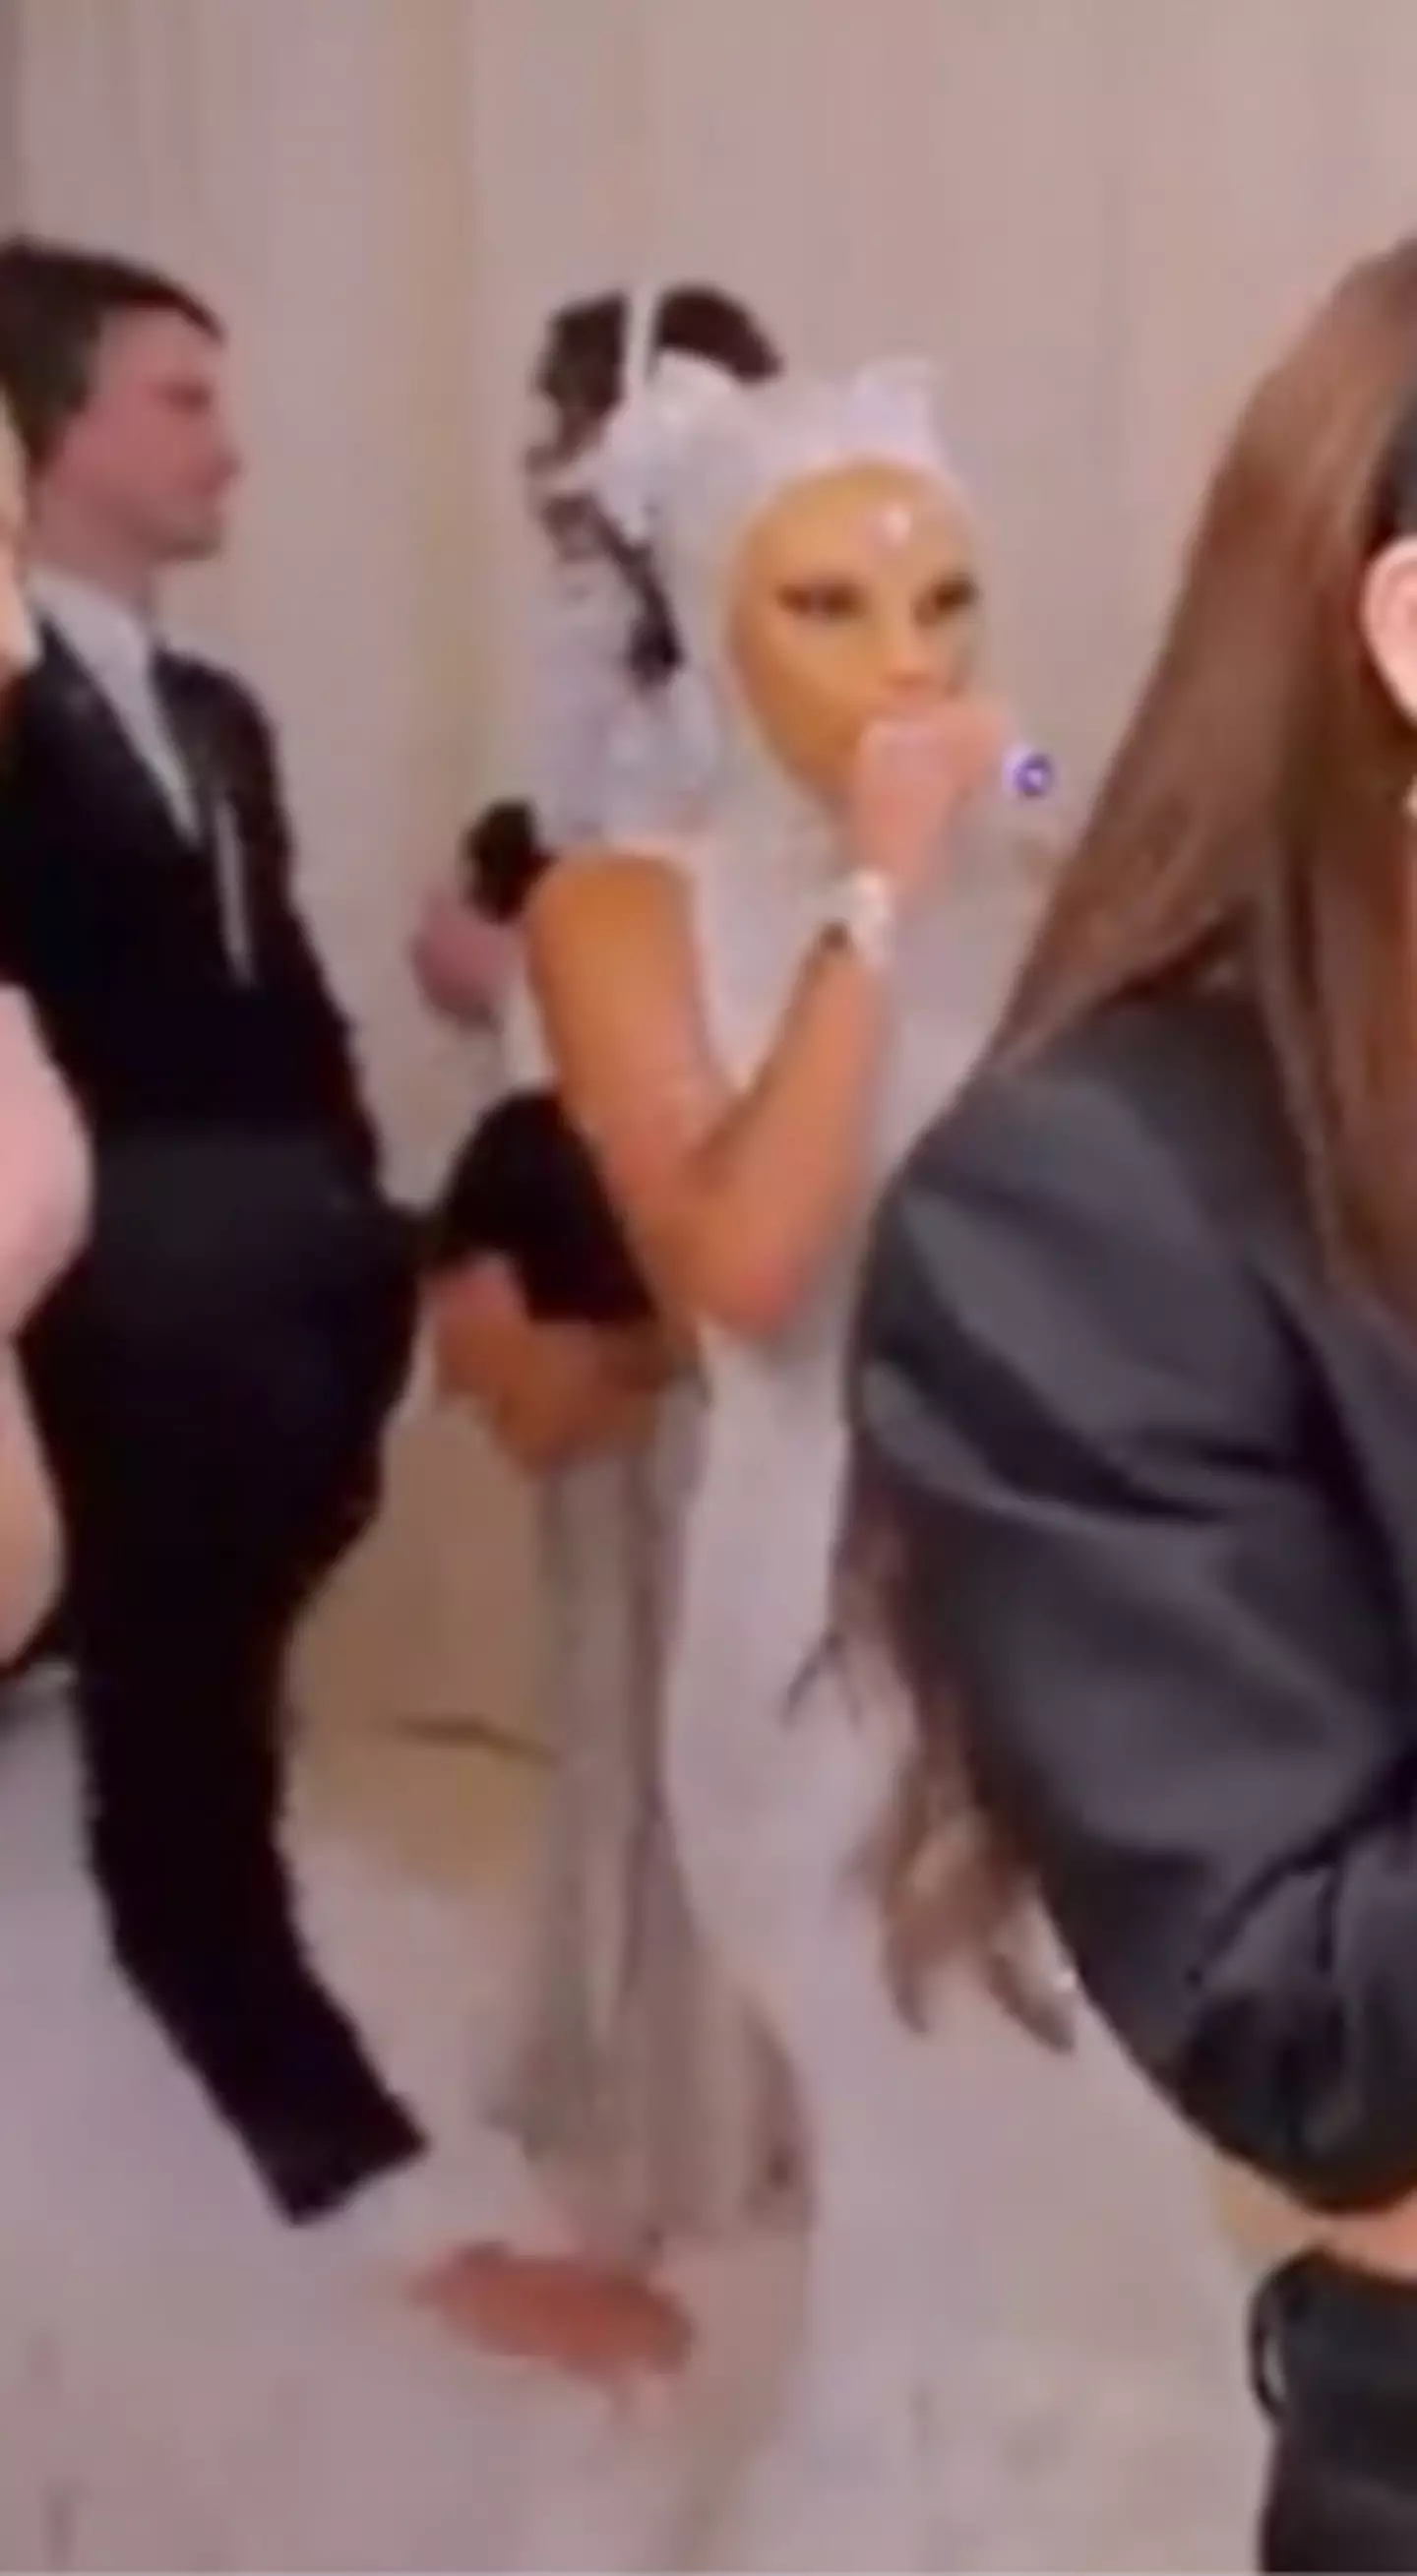 Doja was spotted vaping on the red carpet.